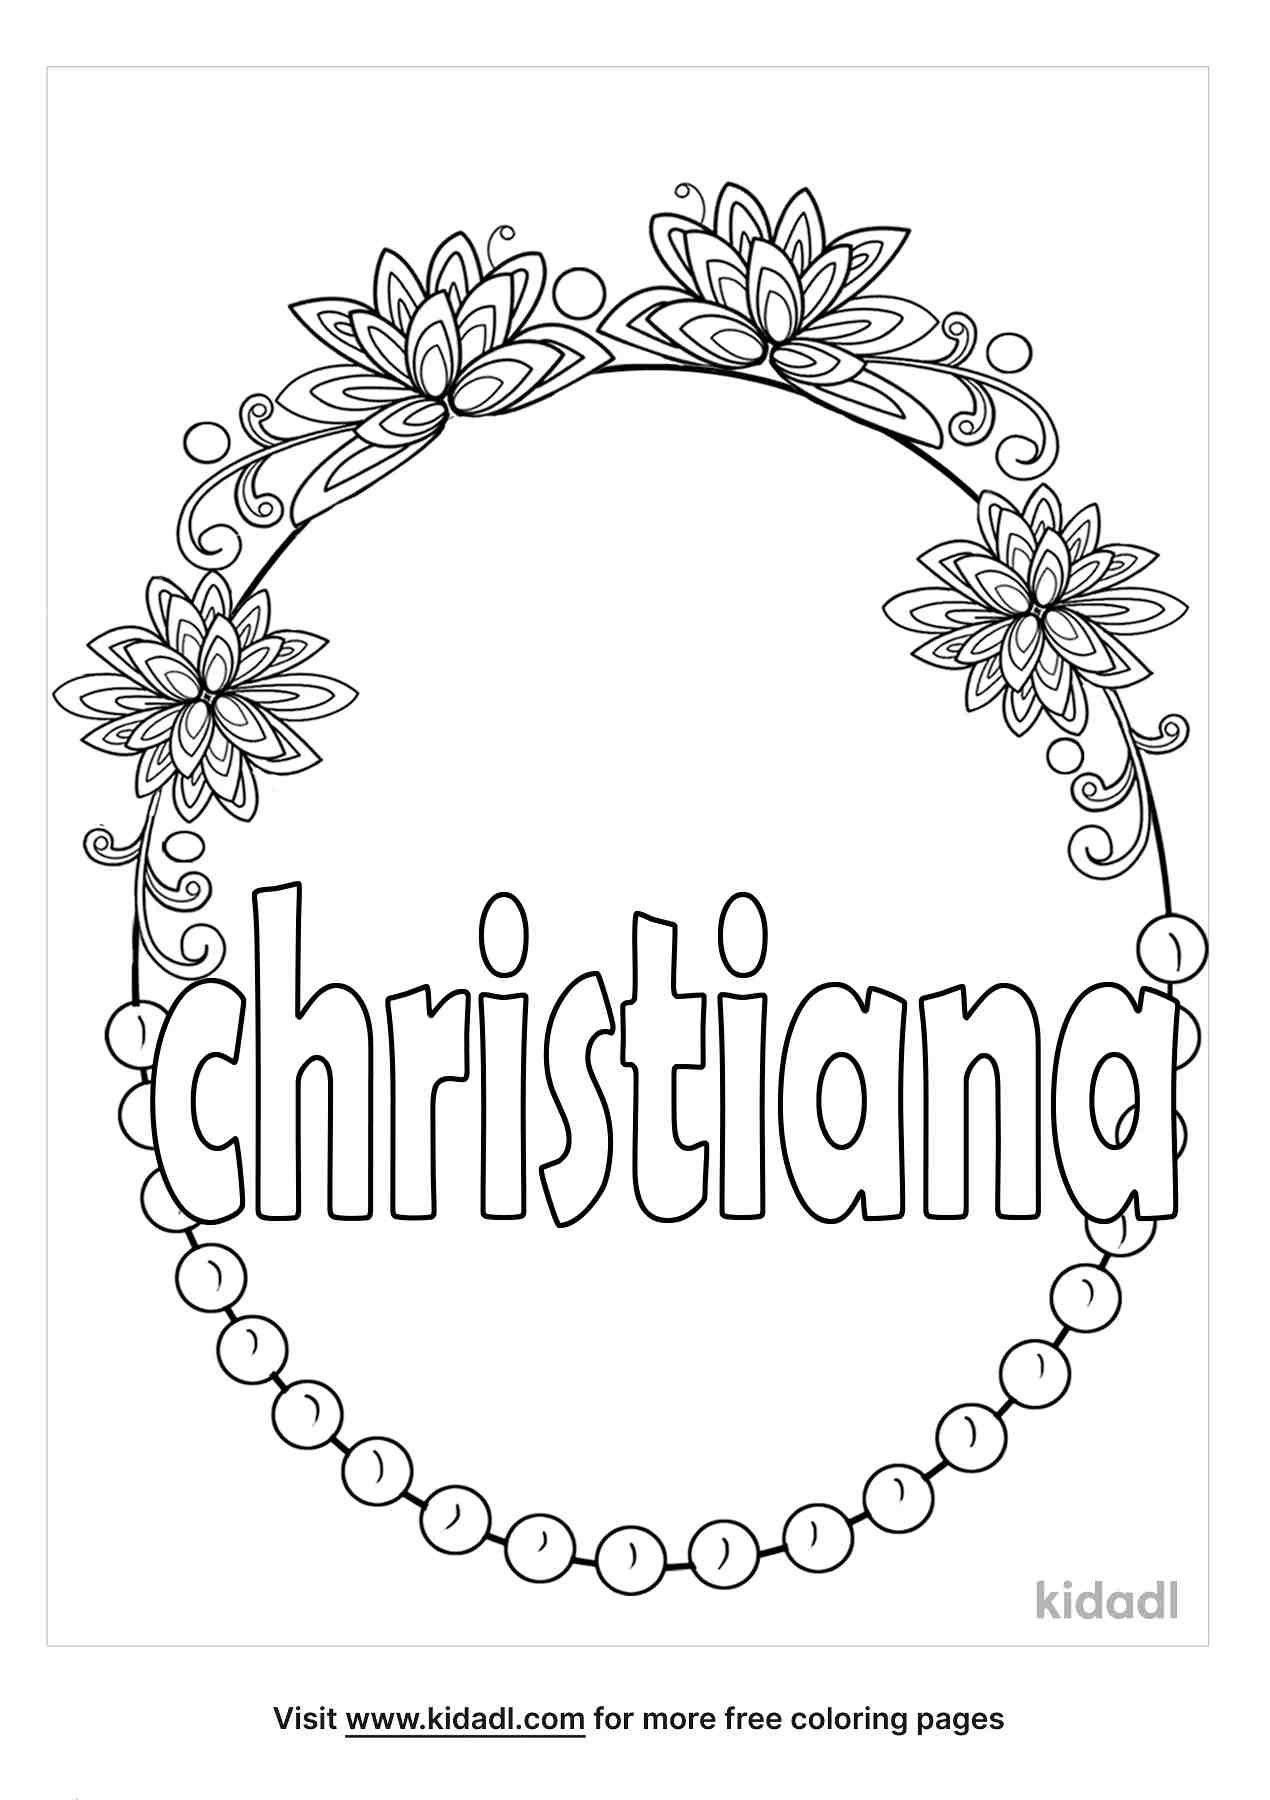 coloring page containing christiana name